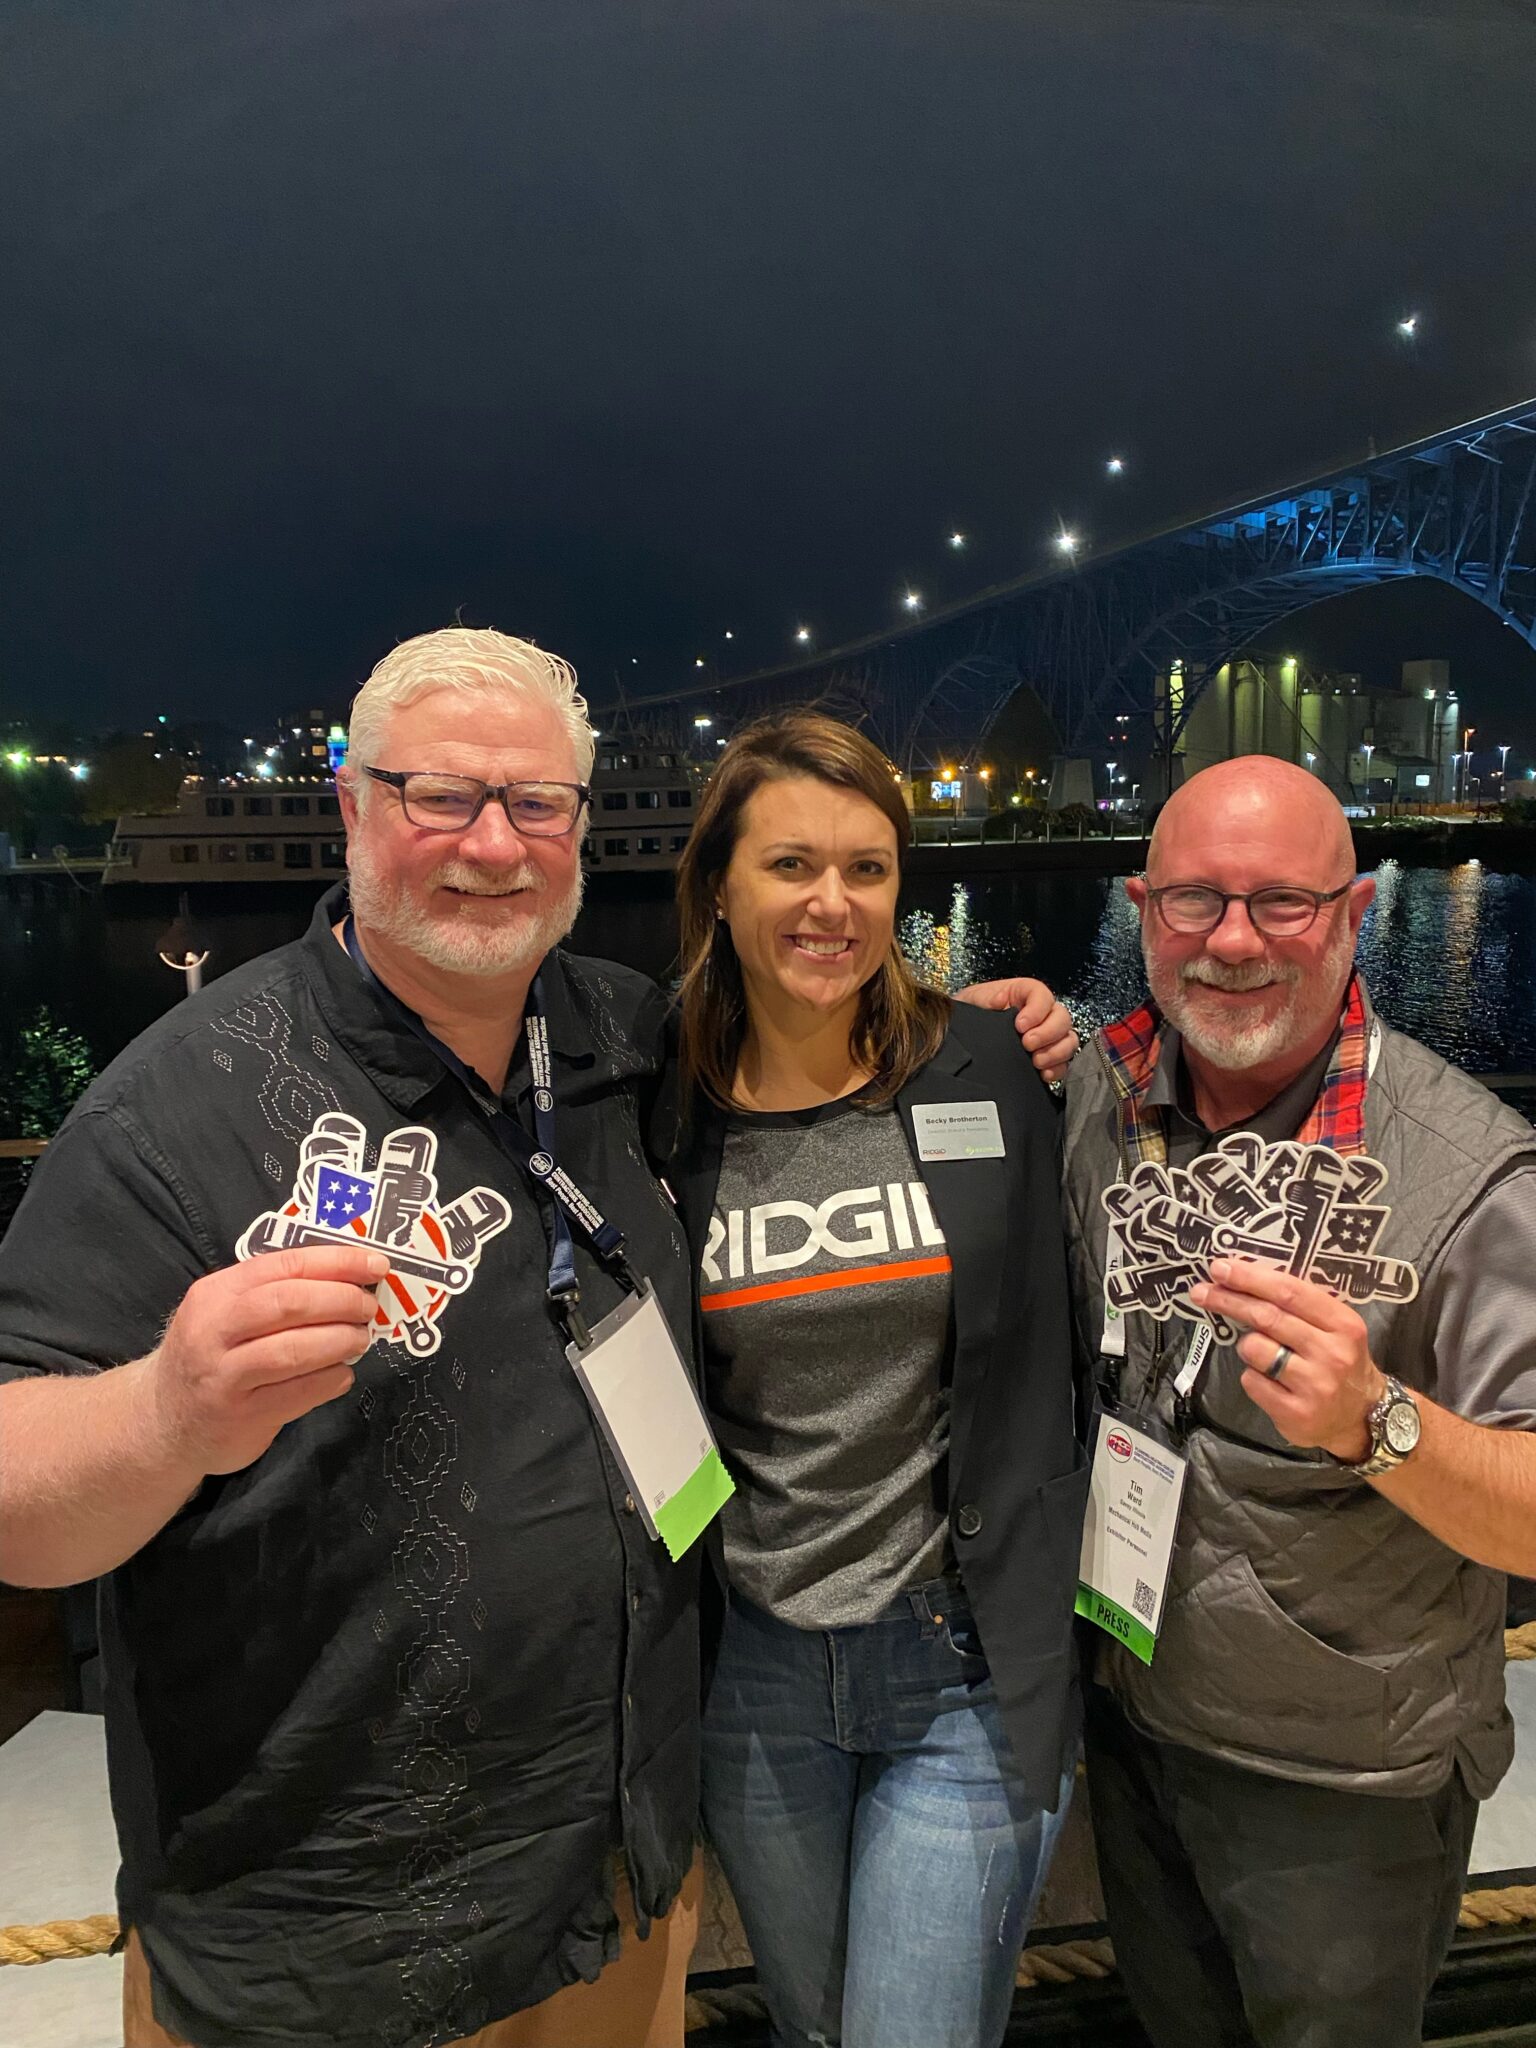 PHCC CONNECT, RIDGID, Oatey, trade show, Cleveland, product showcase, Coach Carter, plumbing, heating, heating and cooling, PHCC